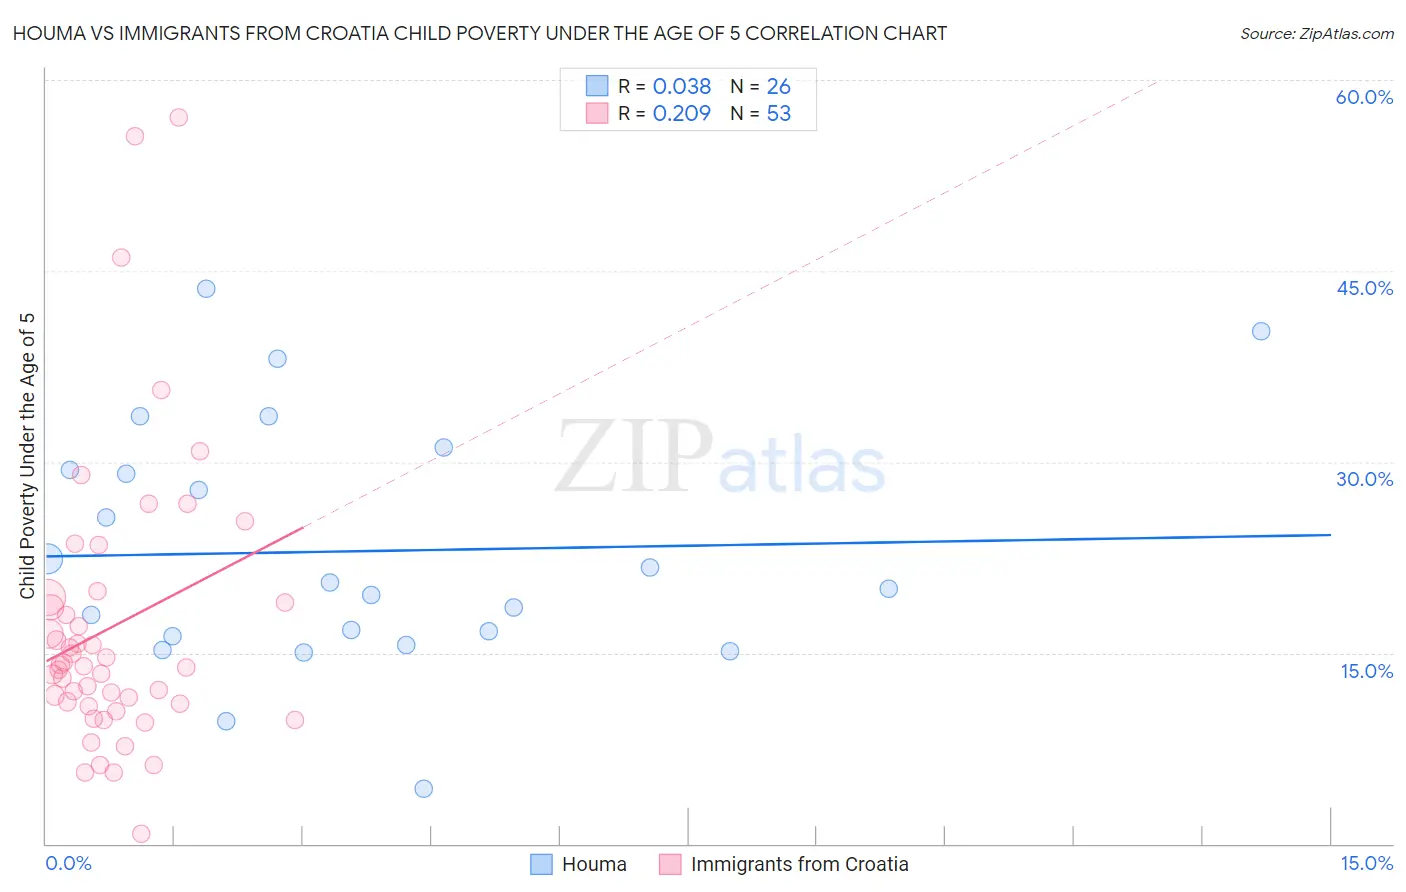 Houma vs Immigrants from Croatia Child Poverty Under the Age of 5